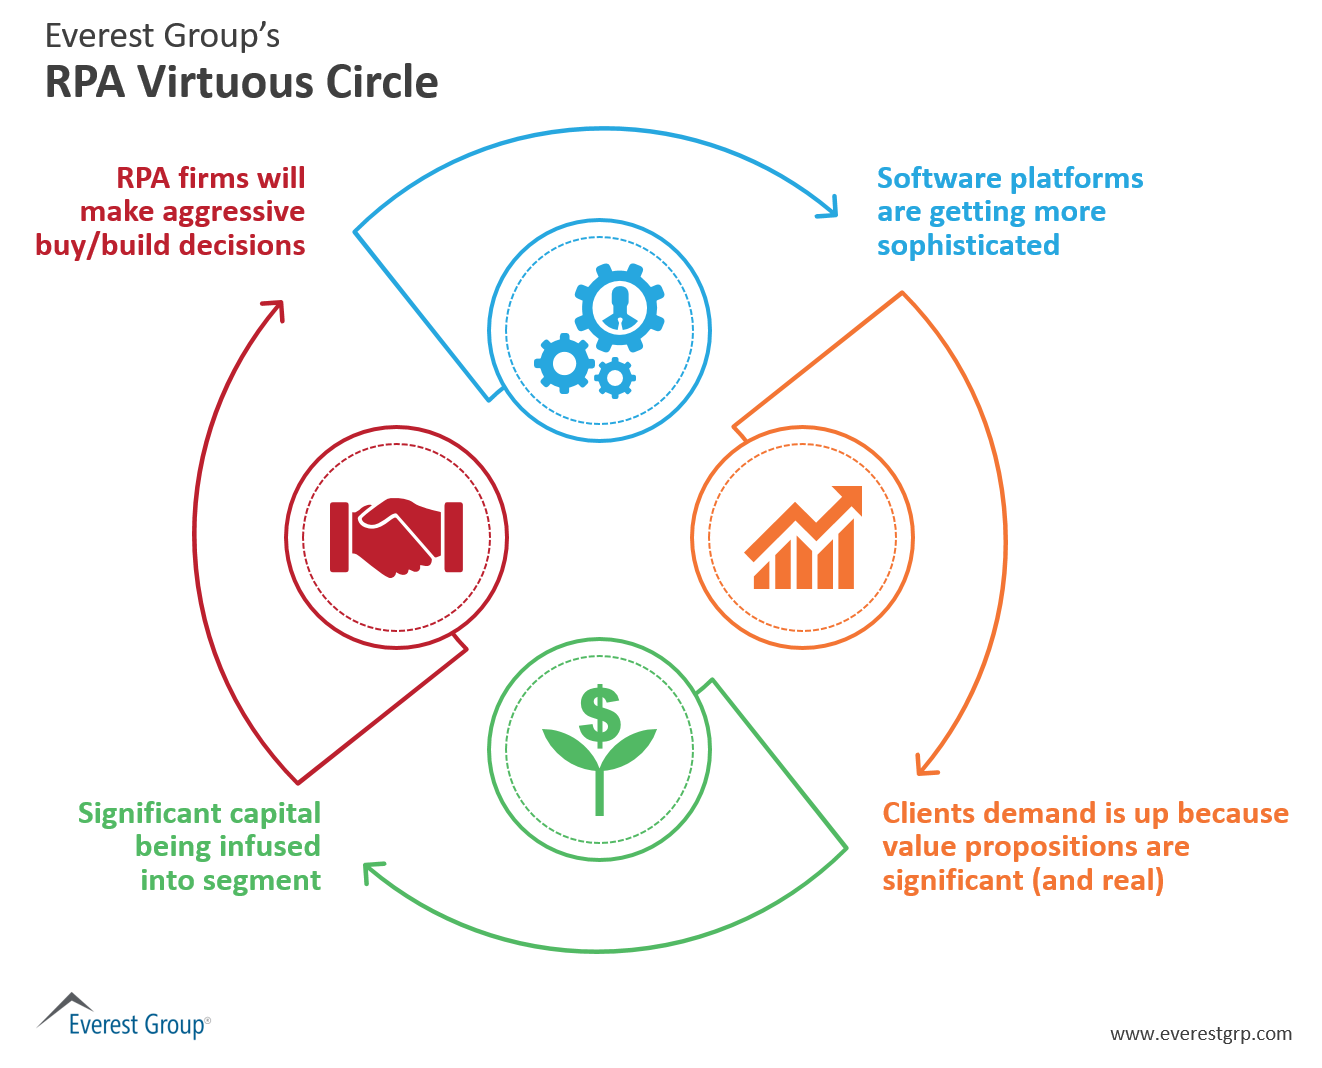 See Everest Group's RPA Virtuous Circle